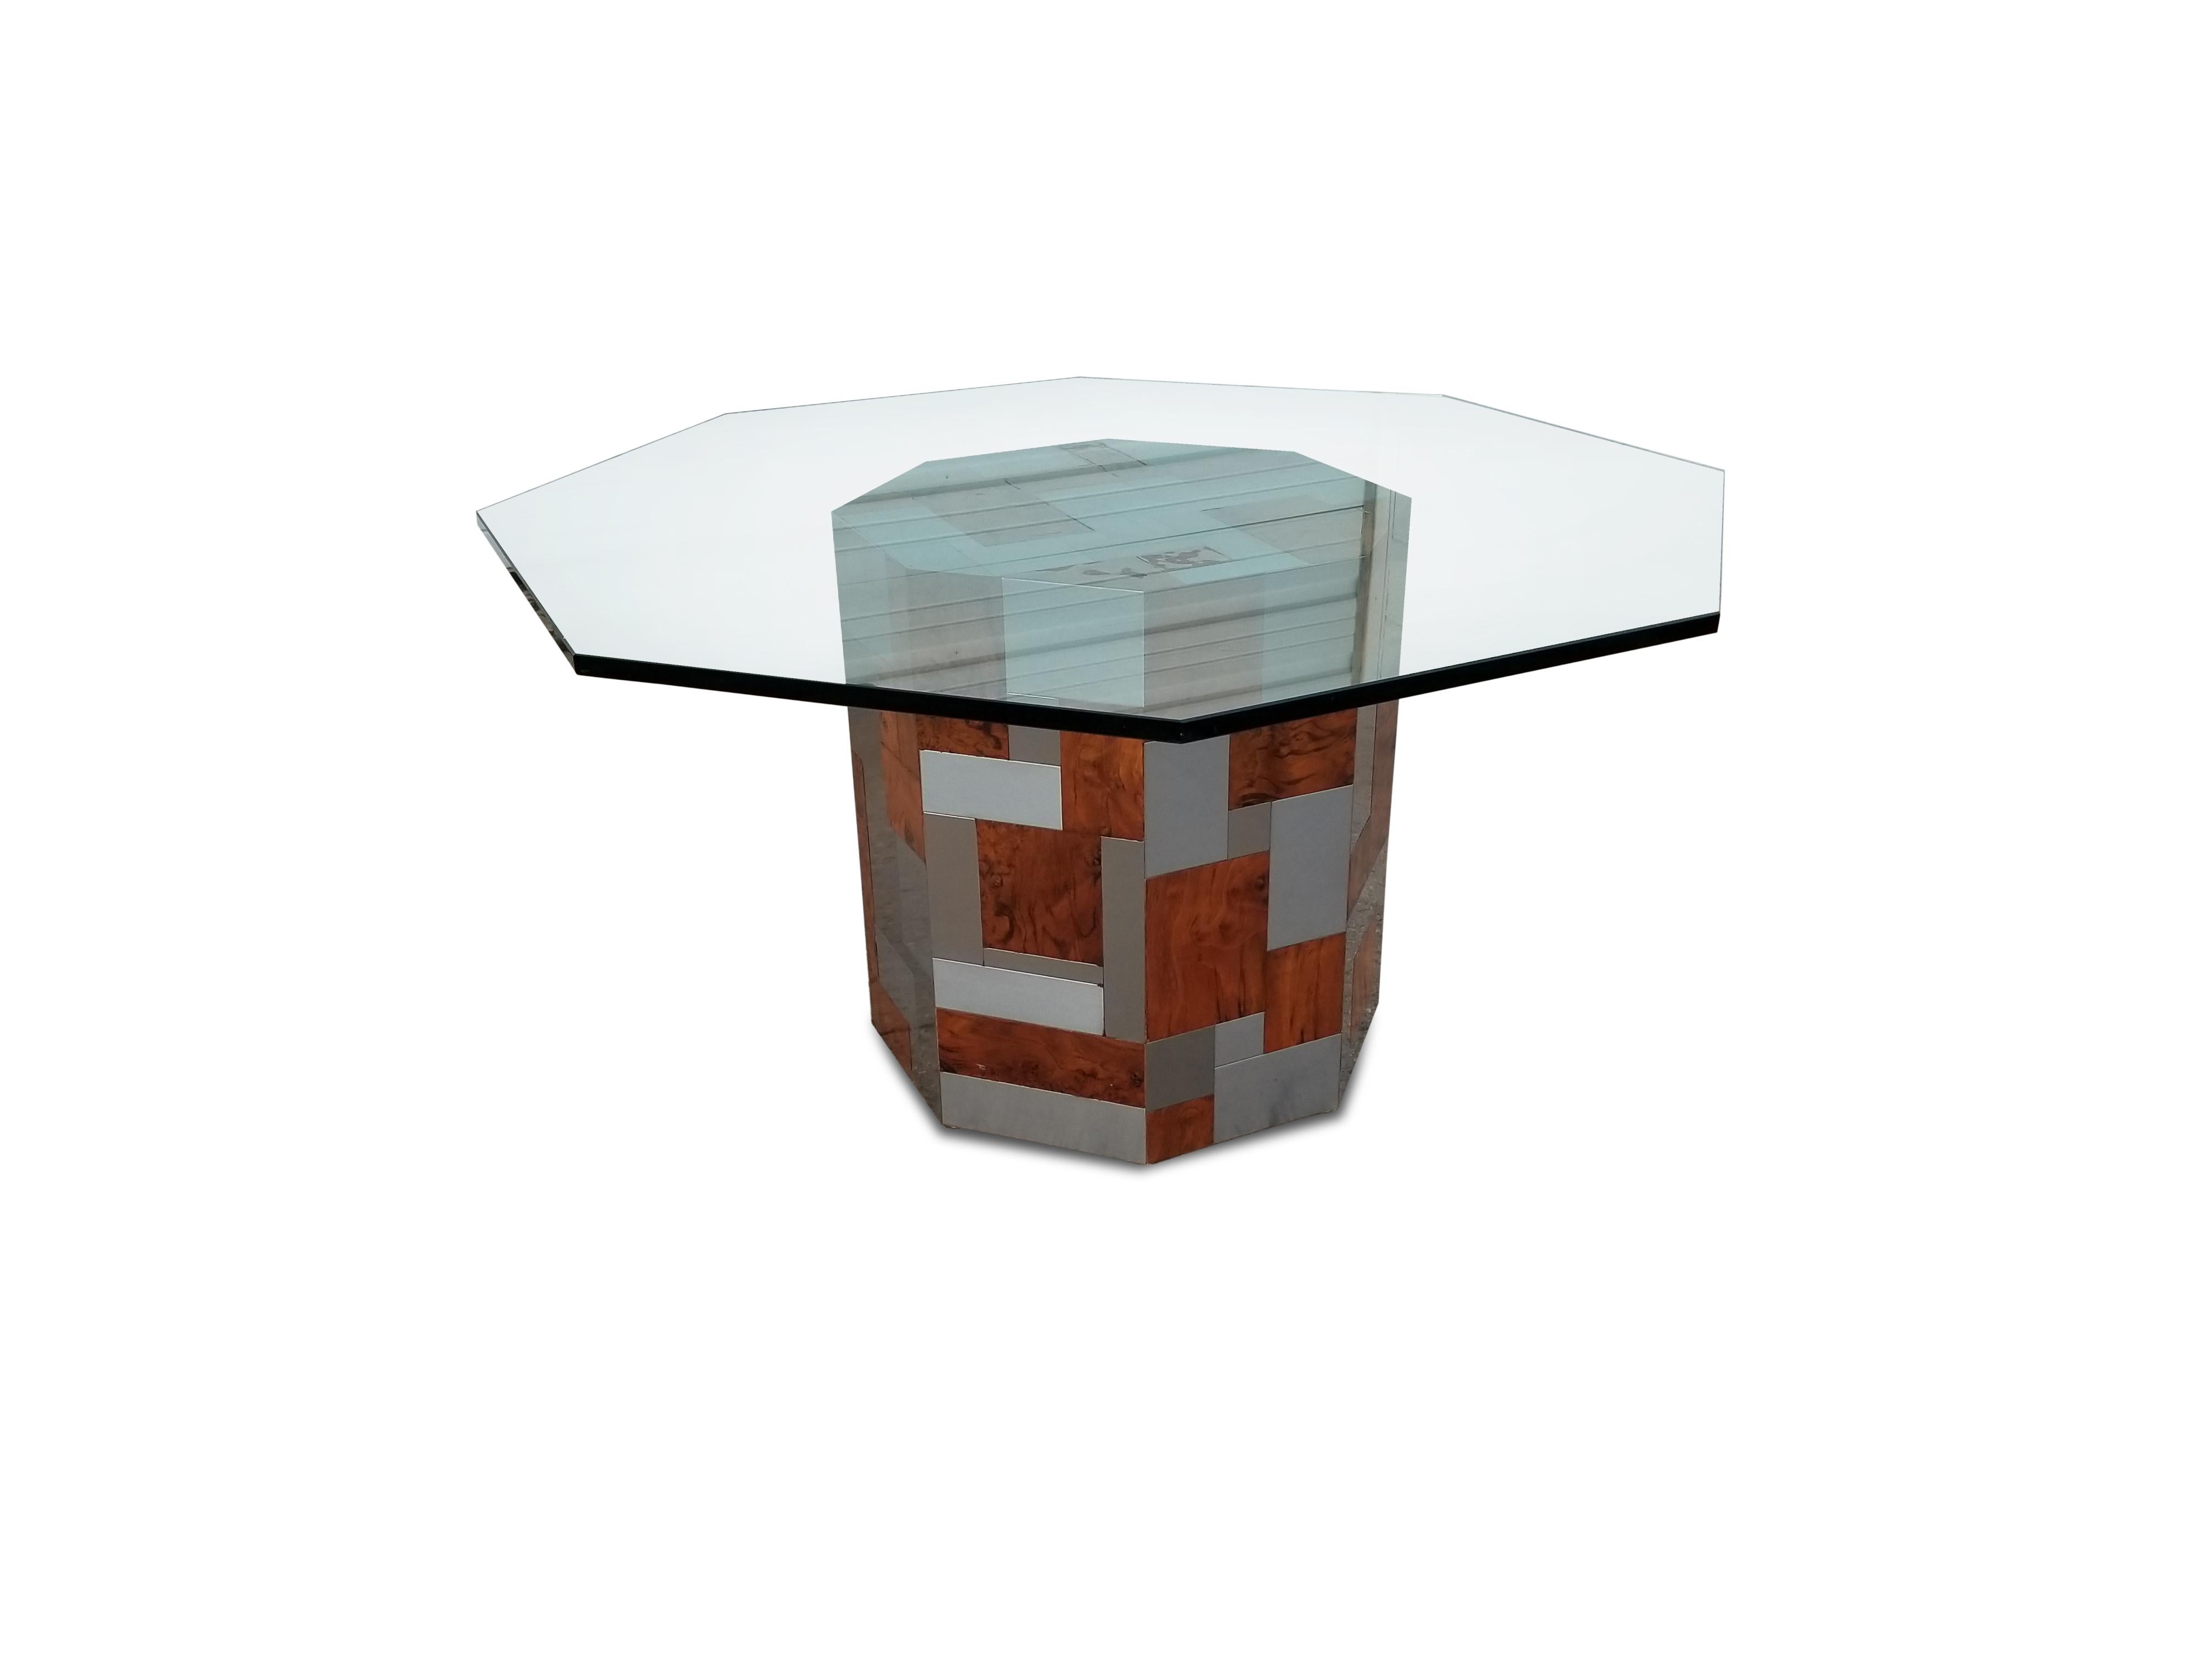 American Signed Paul Evans Octagonal Cityscape Burl Wood and Chrome Dining Table For Sale